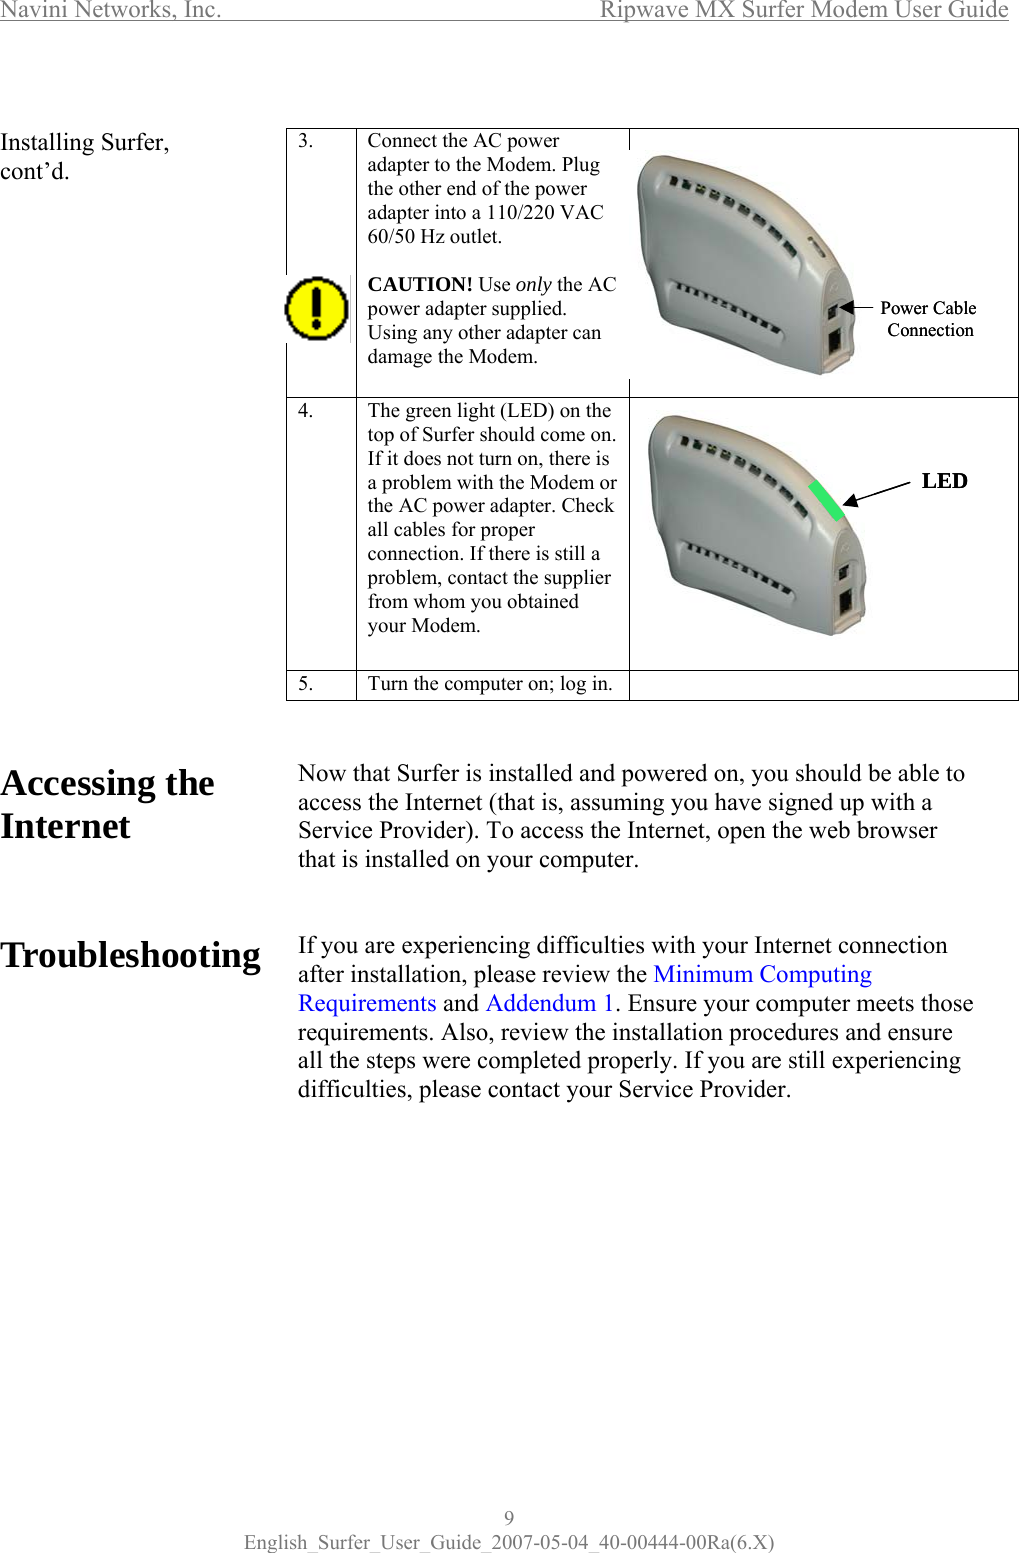 Navini Networks, Inc.      Ripwave MX Surfer Modem User Guide 9 English_Surfer_User_Guide_2007-05-04_40-00444-00Ra(6.X)  Installing Surfer, cont’d.                     Accessing the Internet    Troubleshooting     3.      Connect the AC power adapter to the Modem. Plug the other end of the power adapter into a 110/220 VAC 60/50 Hz outlet.  CAUTION! Use only the AC power adapter supplied. Using any other adapter can damage the Modem.   4.  The green light (LED) on the top of Surfer should come on. If it does not turn on, there is a problem with the Modem or the AC power adapter. Check all cables for proper connection. If there is still a problem, contact the supplier from whom you obtained your Modem.  5.  Turn the computer on; log in.     Now that Surfer is installed and powered on, you should be able to access the Internet (that is, assuming you have signed up with a Service Provider). To access the Internet, open the web browser that is installed on your computer.   If you are experiencing difficulties with your Internet connection after installation, please review the Minimum Computing Requirements and Addendum 1. Ensure your computer meets those requirements. Also, review the installation procedures and ensure all the steps were completed properly. If you are still experiencing difficulties, please contact your Service Provider.    Power Cable ConnectionPower Cable ConnectionLEDLED 